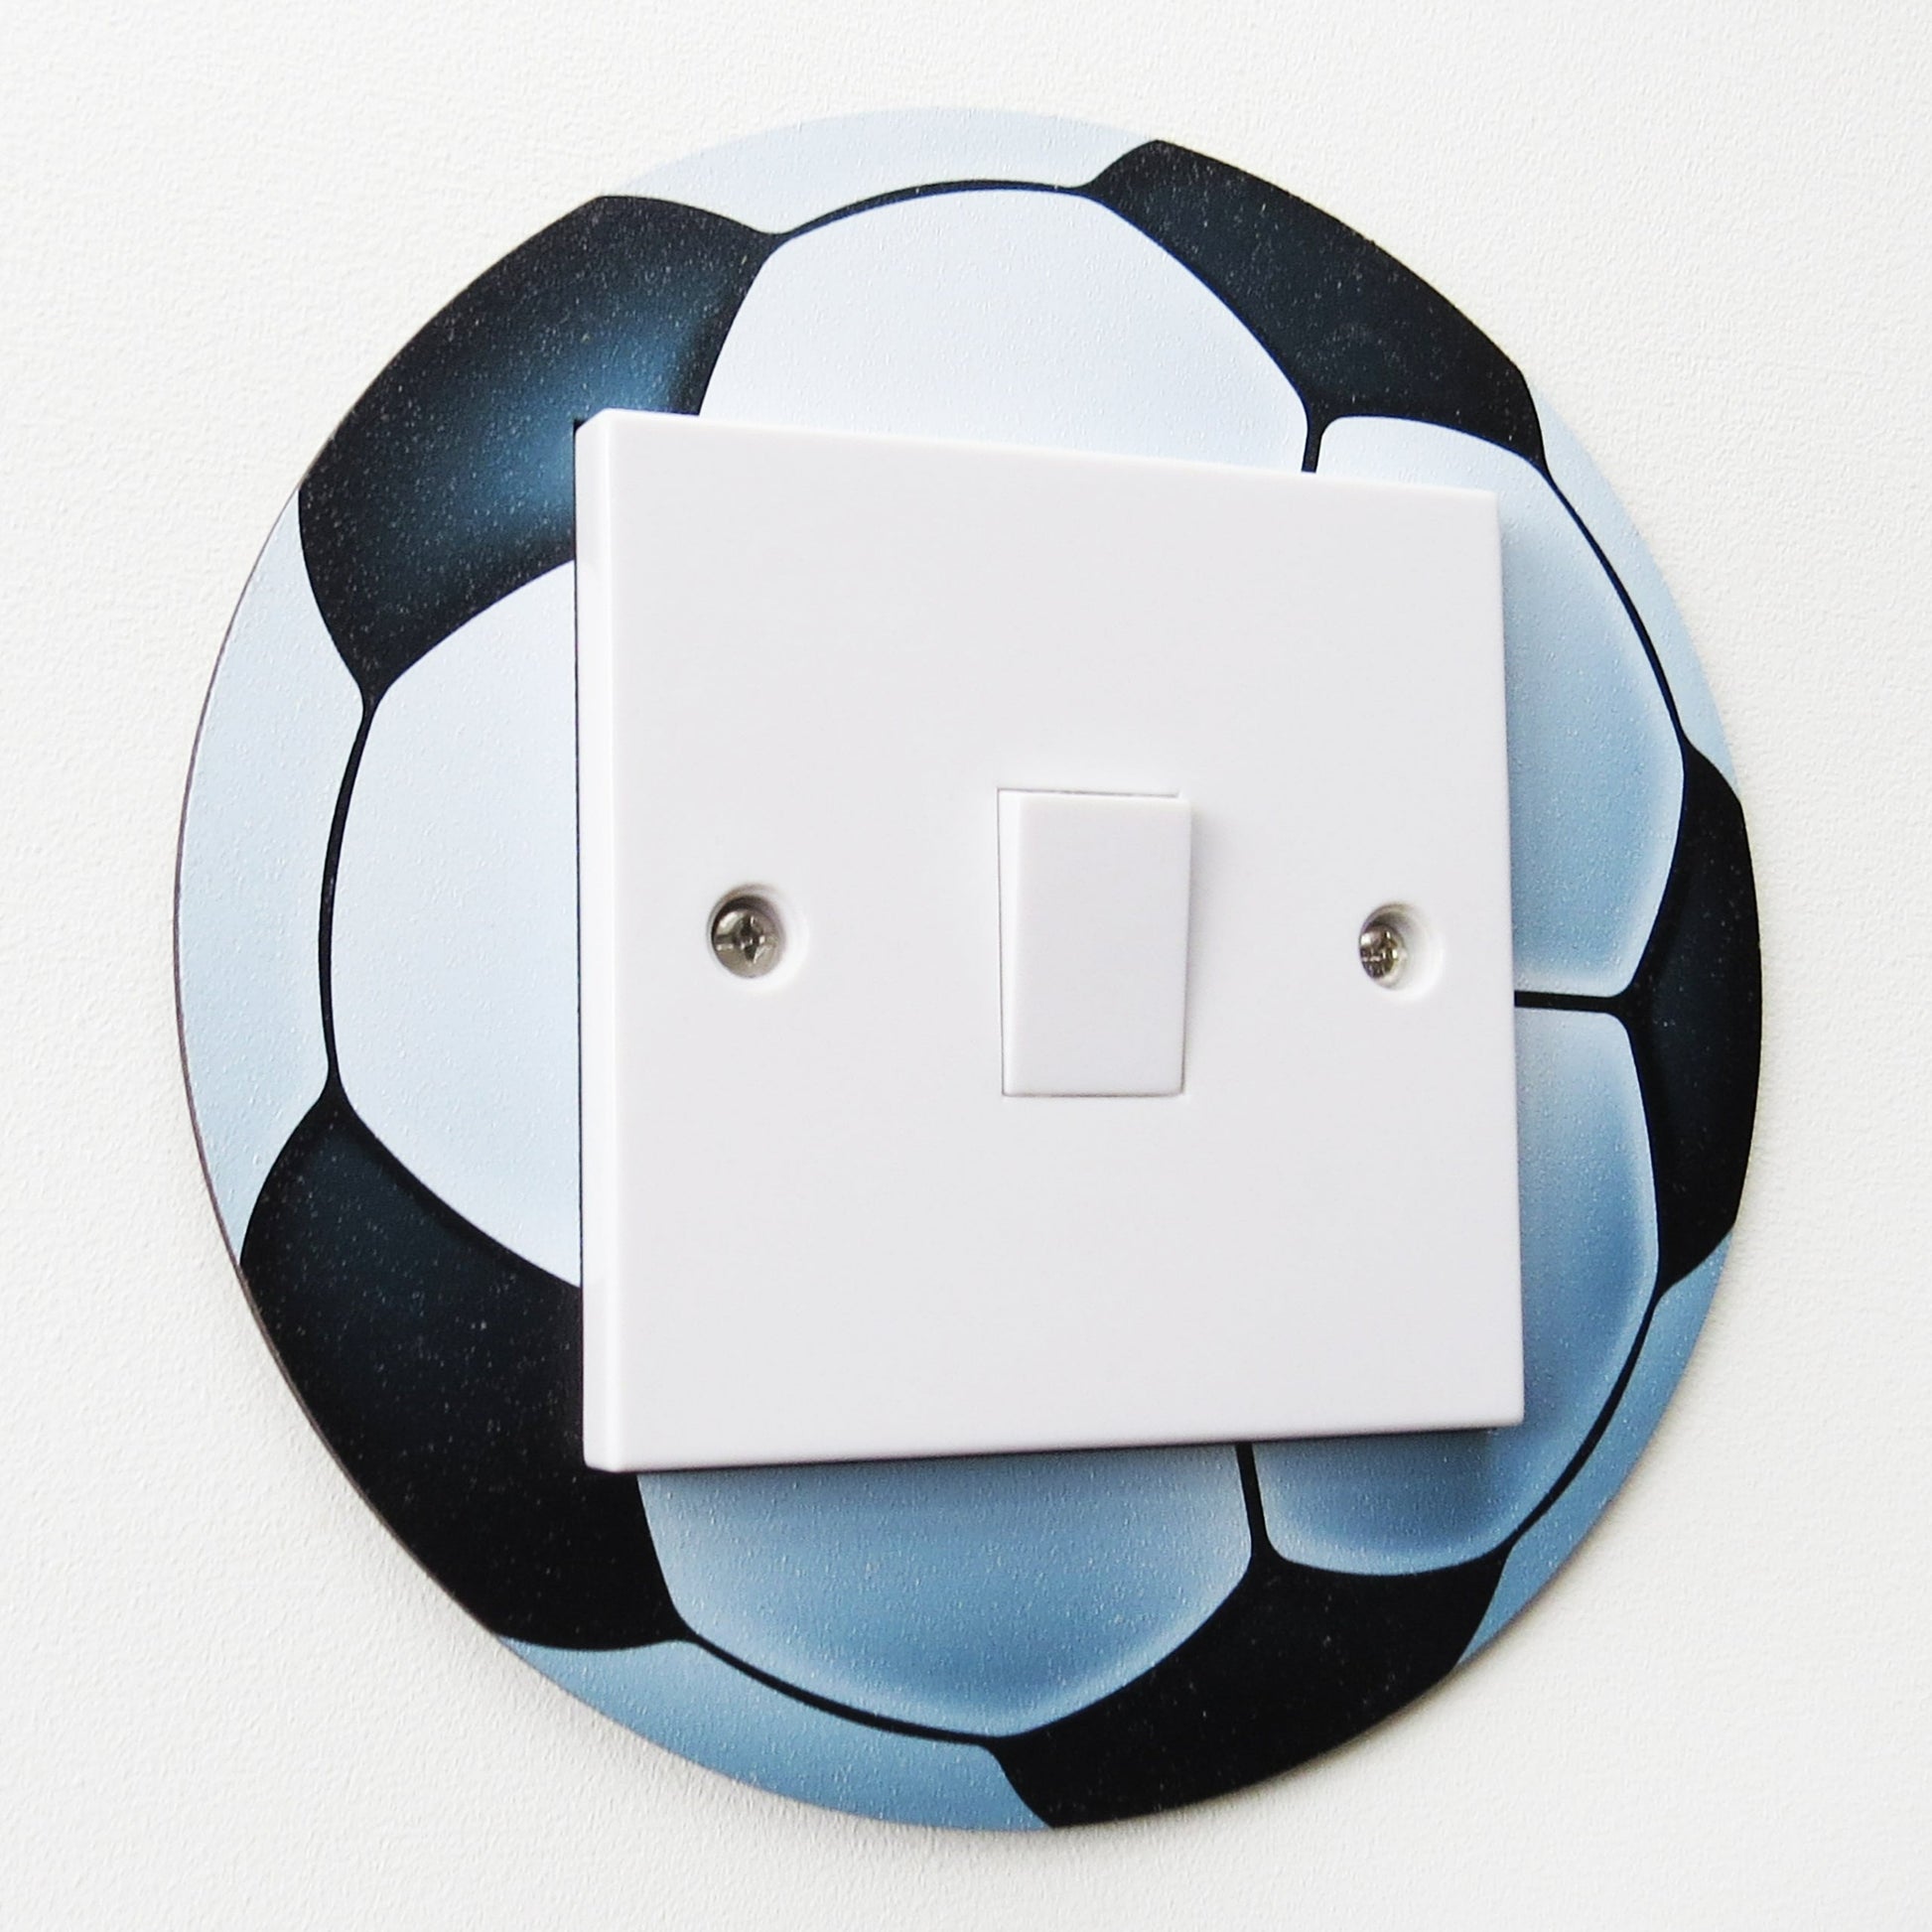 Football Soccer Ball Printed Light Switch Surround